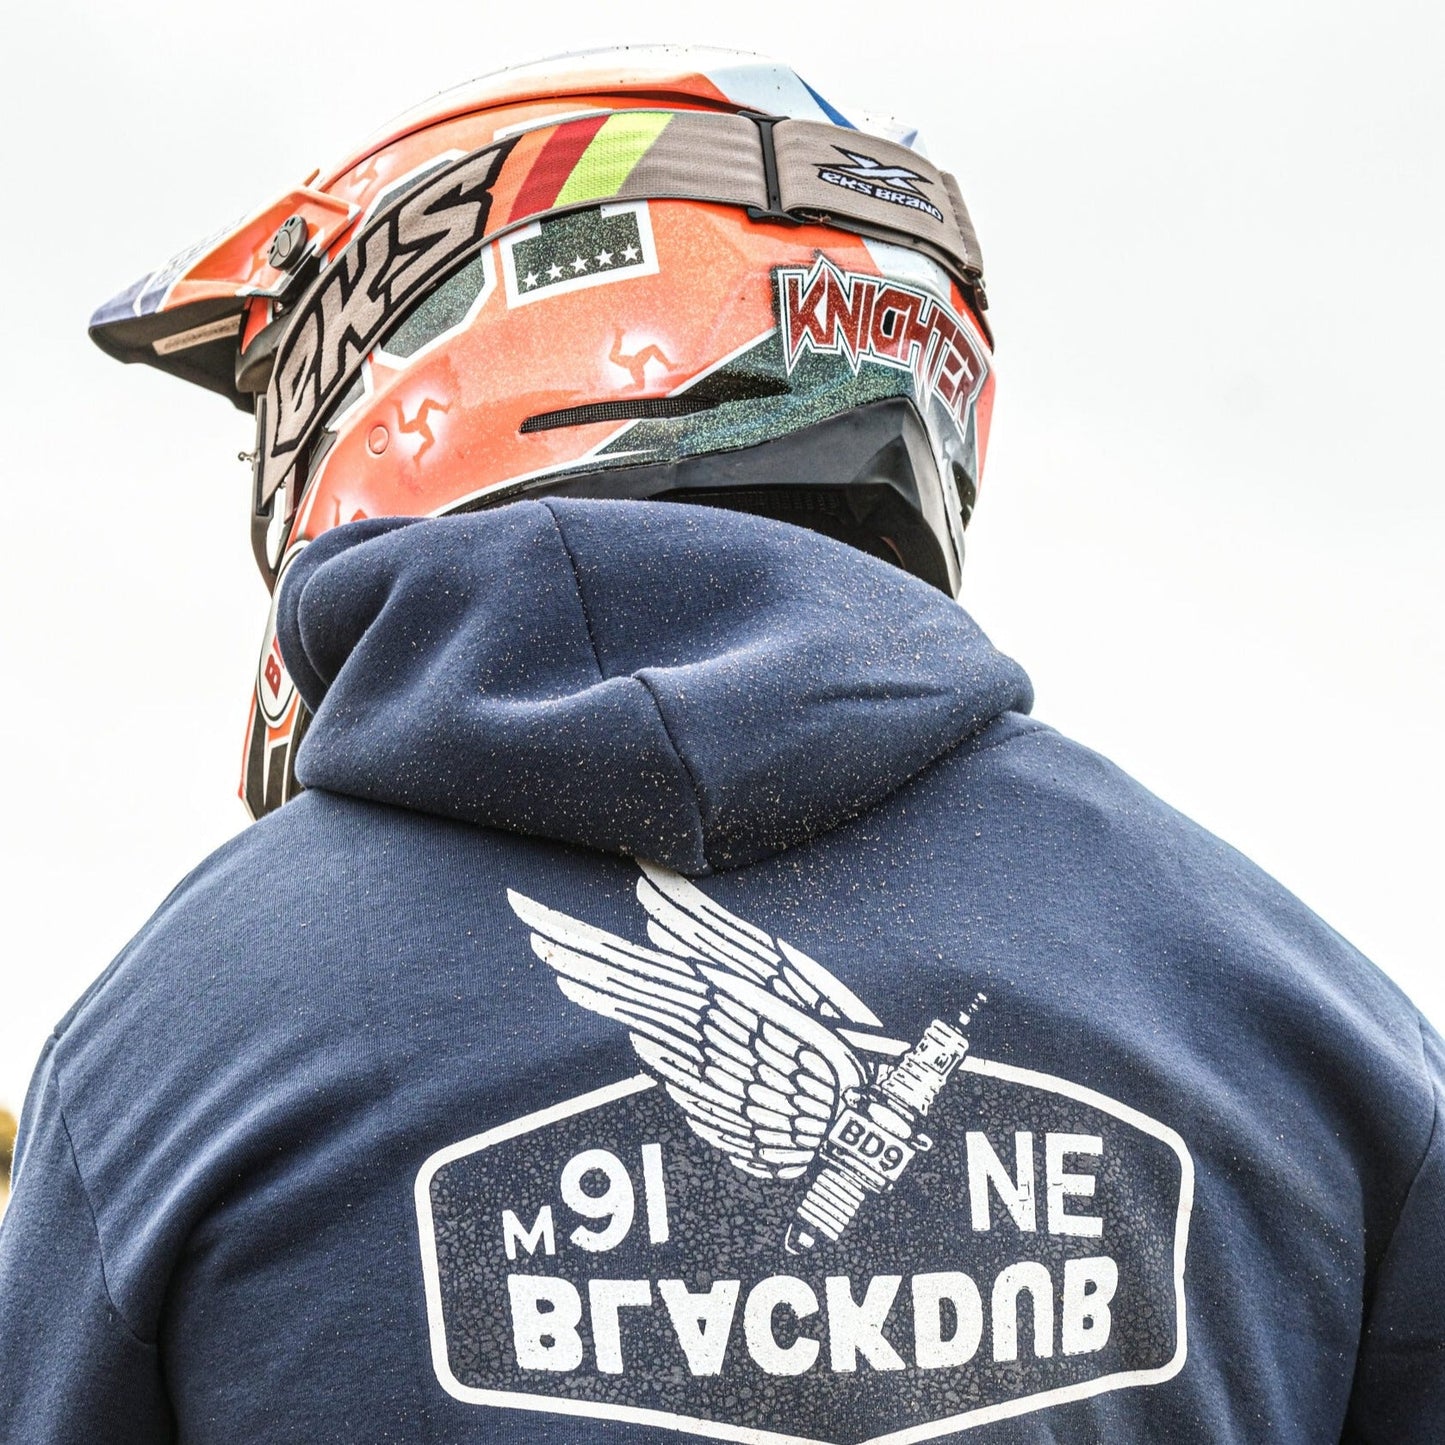 David Knight Enduro Racer, World Enduro Rider, Enduro Racing, Motorcycle Enduro, Motorcycle Racing, Bleu Hoodie, The Black Dub, Uggly&Co, ugglyandco, ugly and co, motorcycle fashion, vintage styled hoodie, isle of man tt merchandise